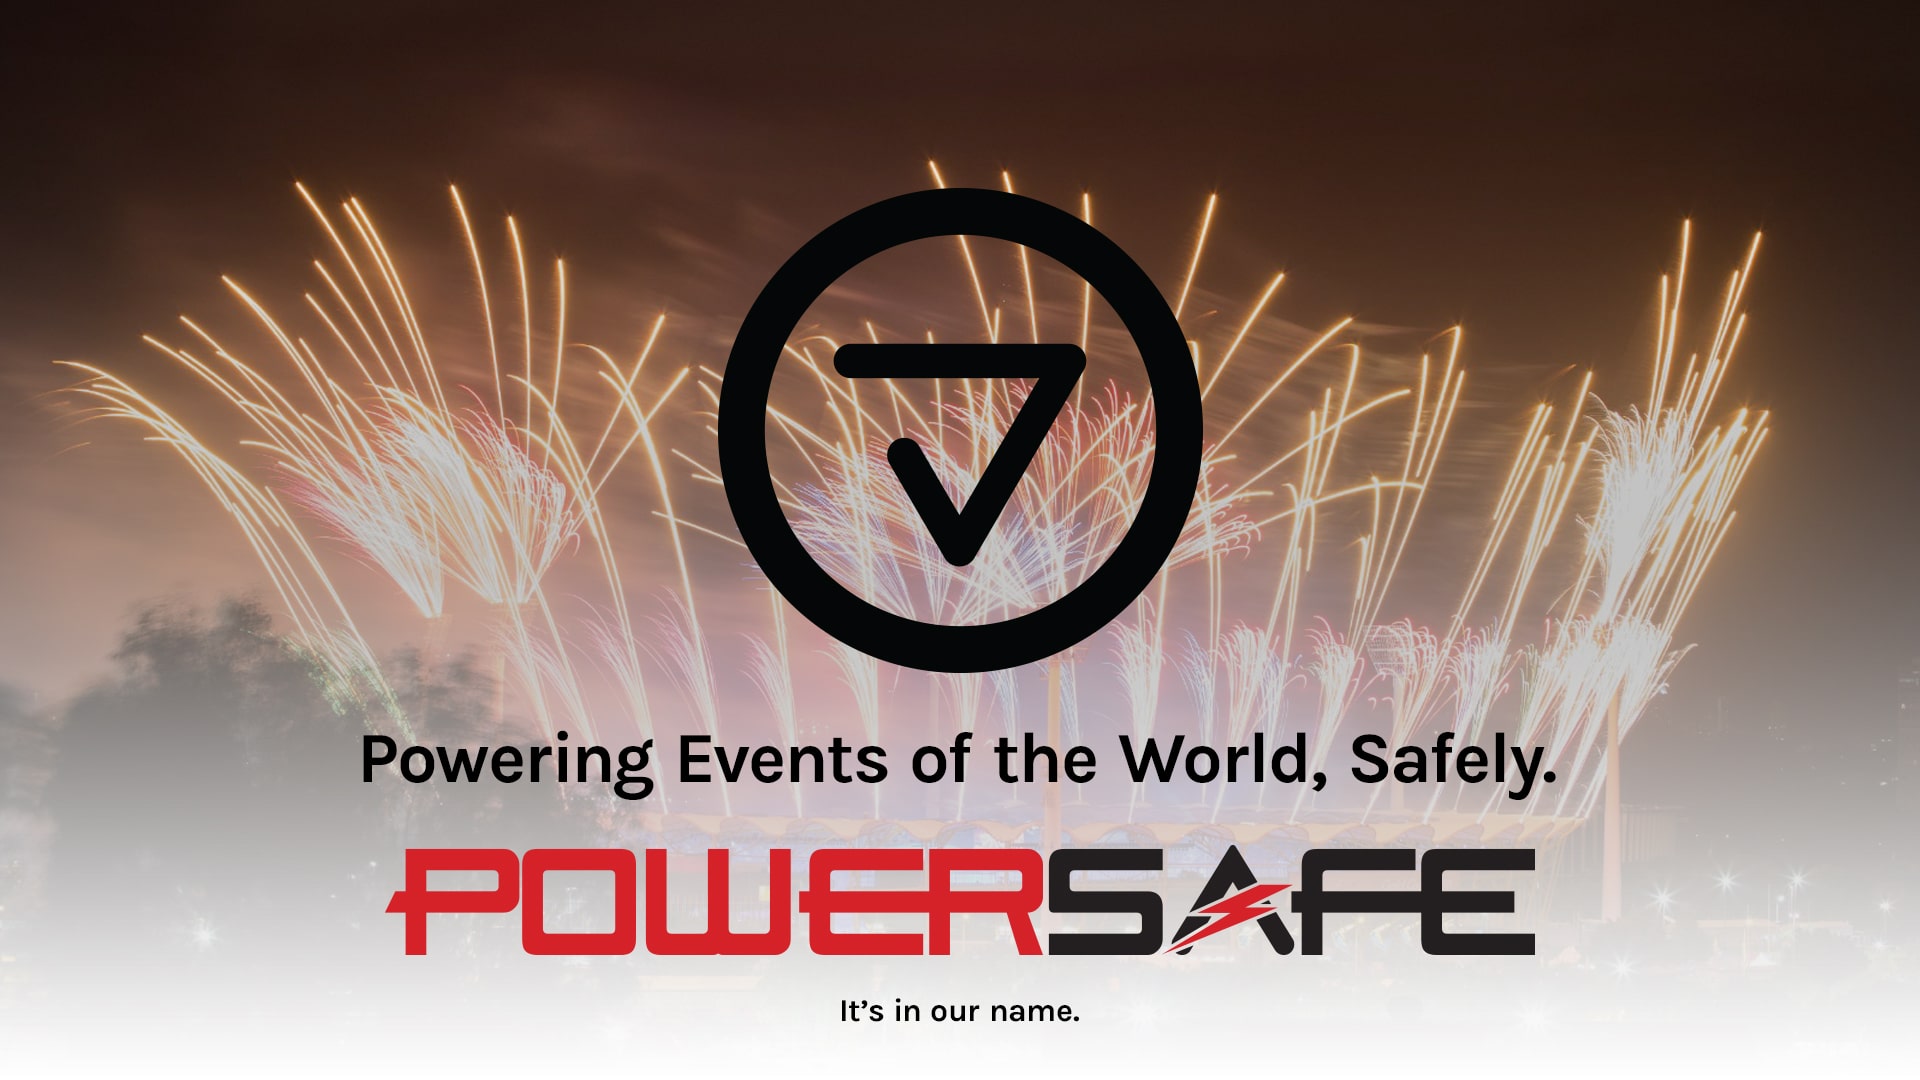 Powering Events of the World, Safely.